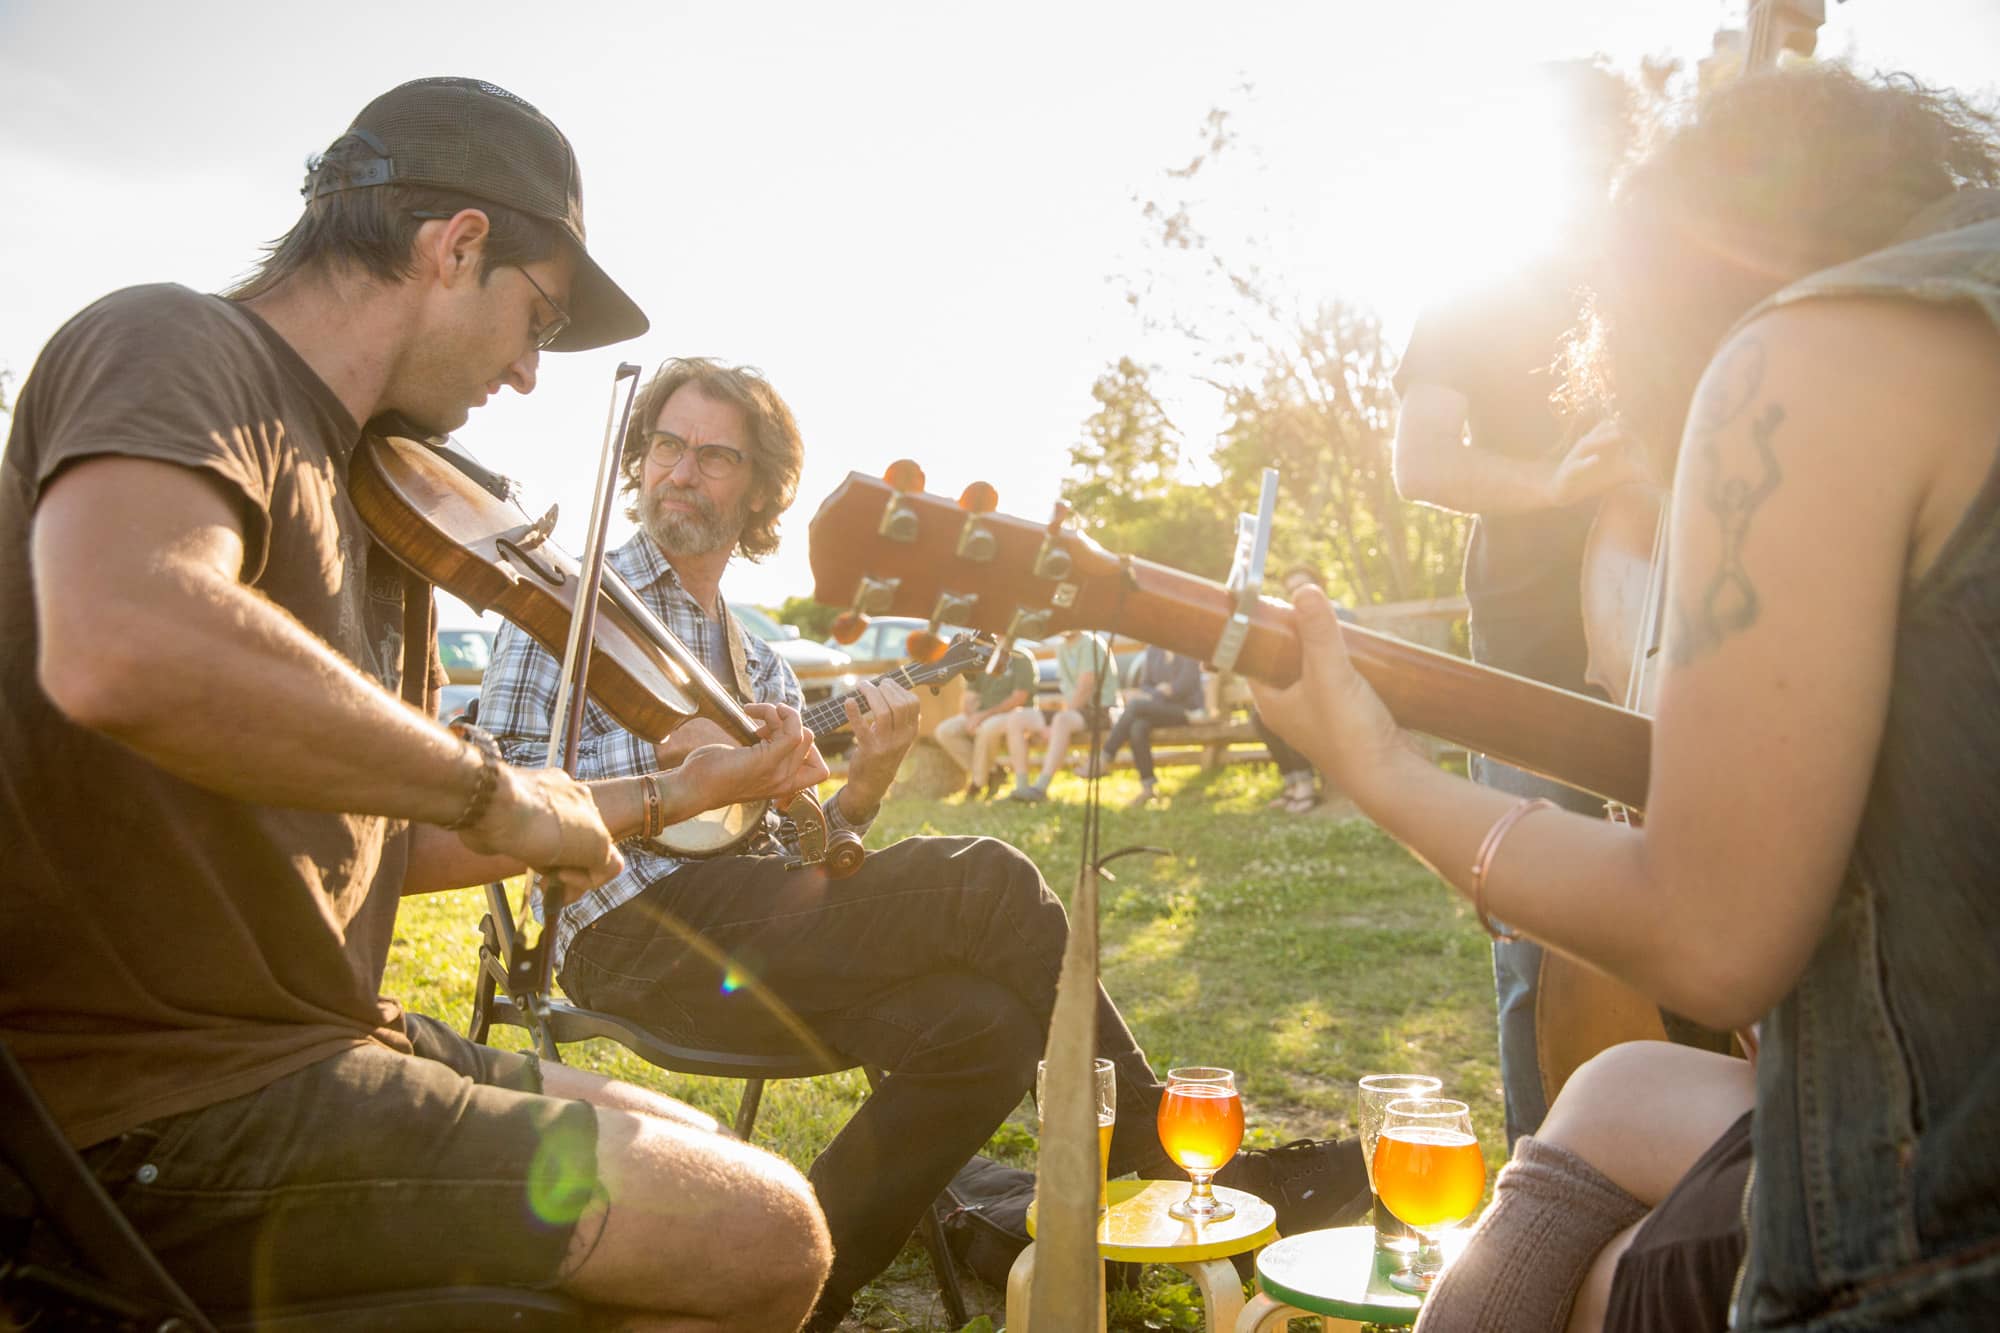 There is never a dull moment in Athens County as outdoor events continually populate the city and surrounding community. Shown here are musicians taking part in the Old Time Jam on the grounds of Little Fish Brewing in Athens.